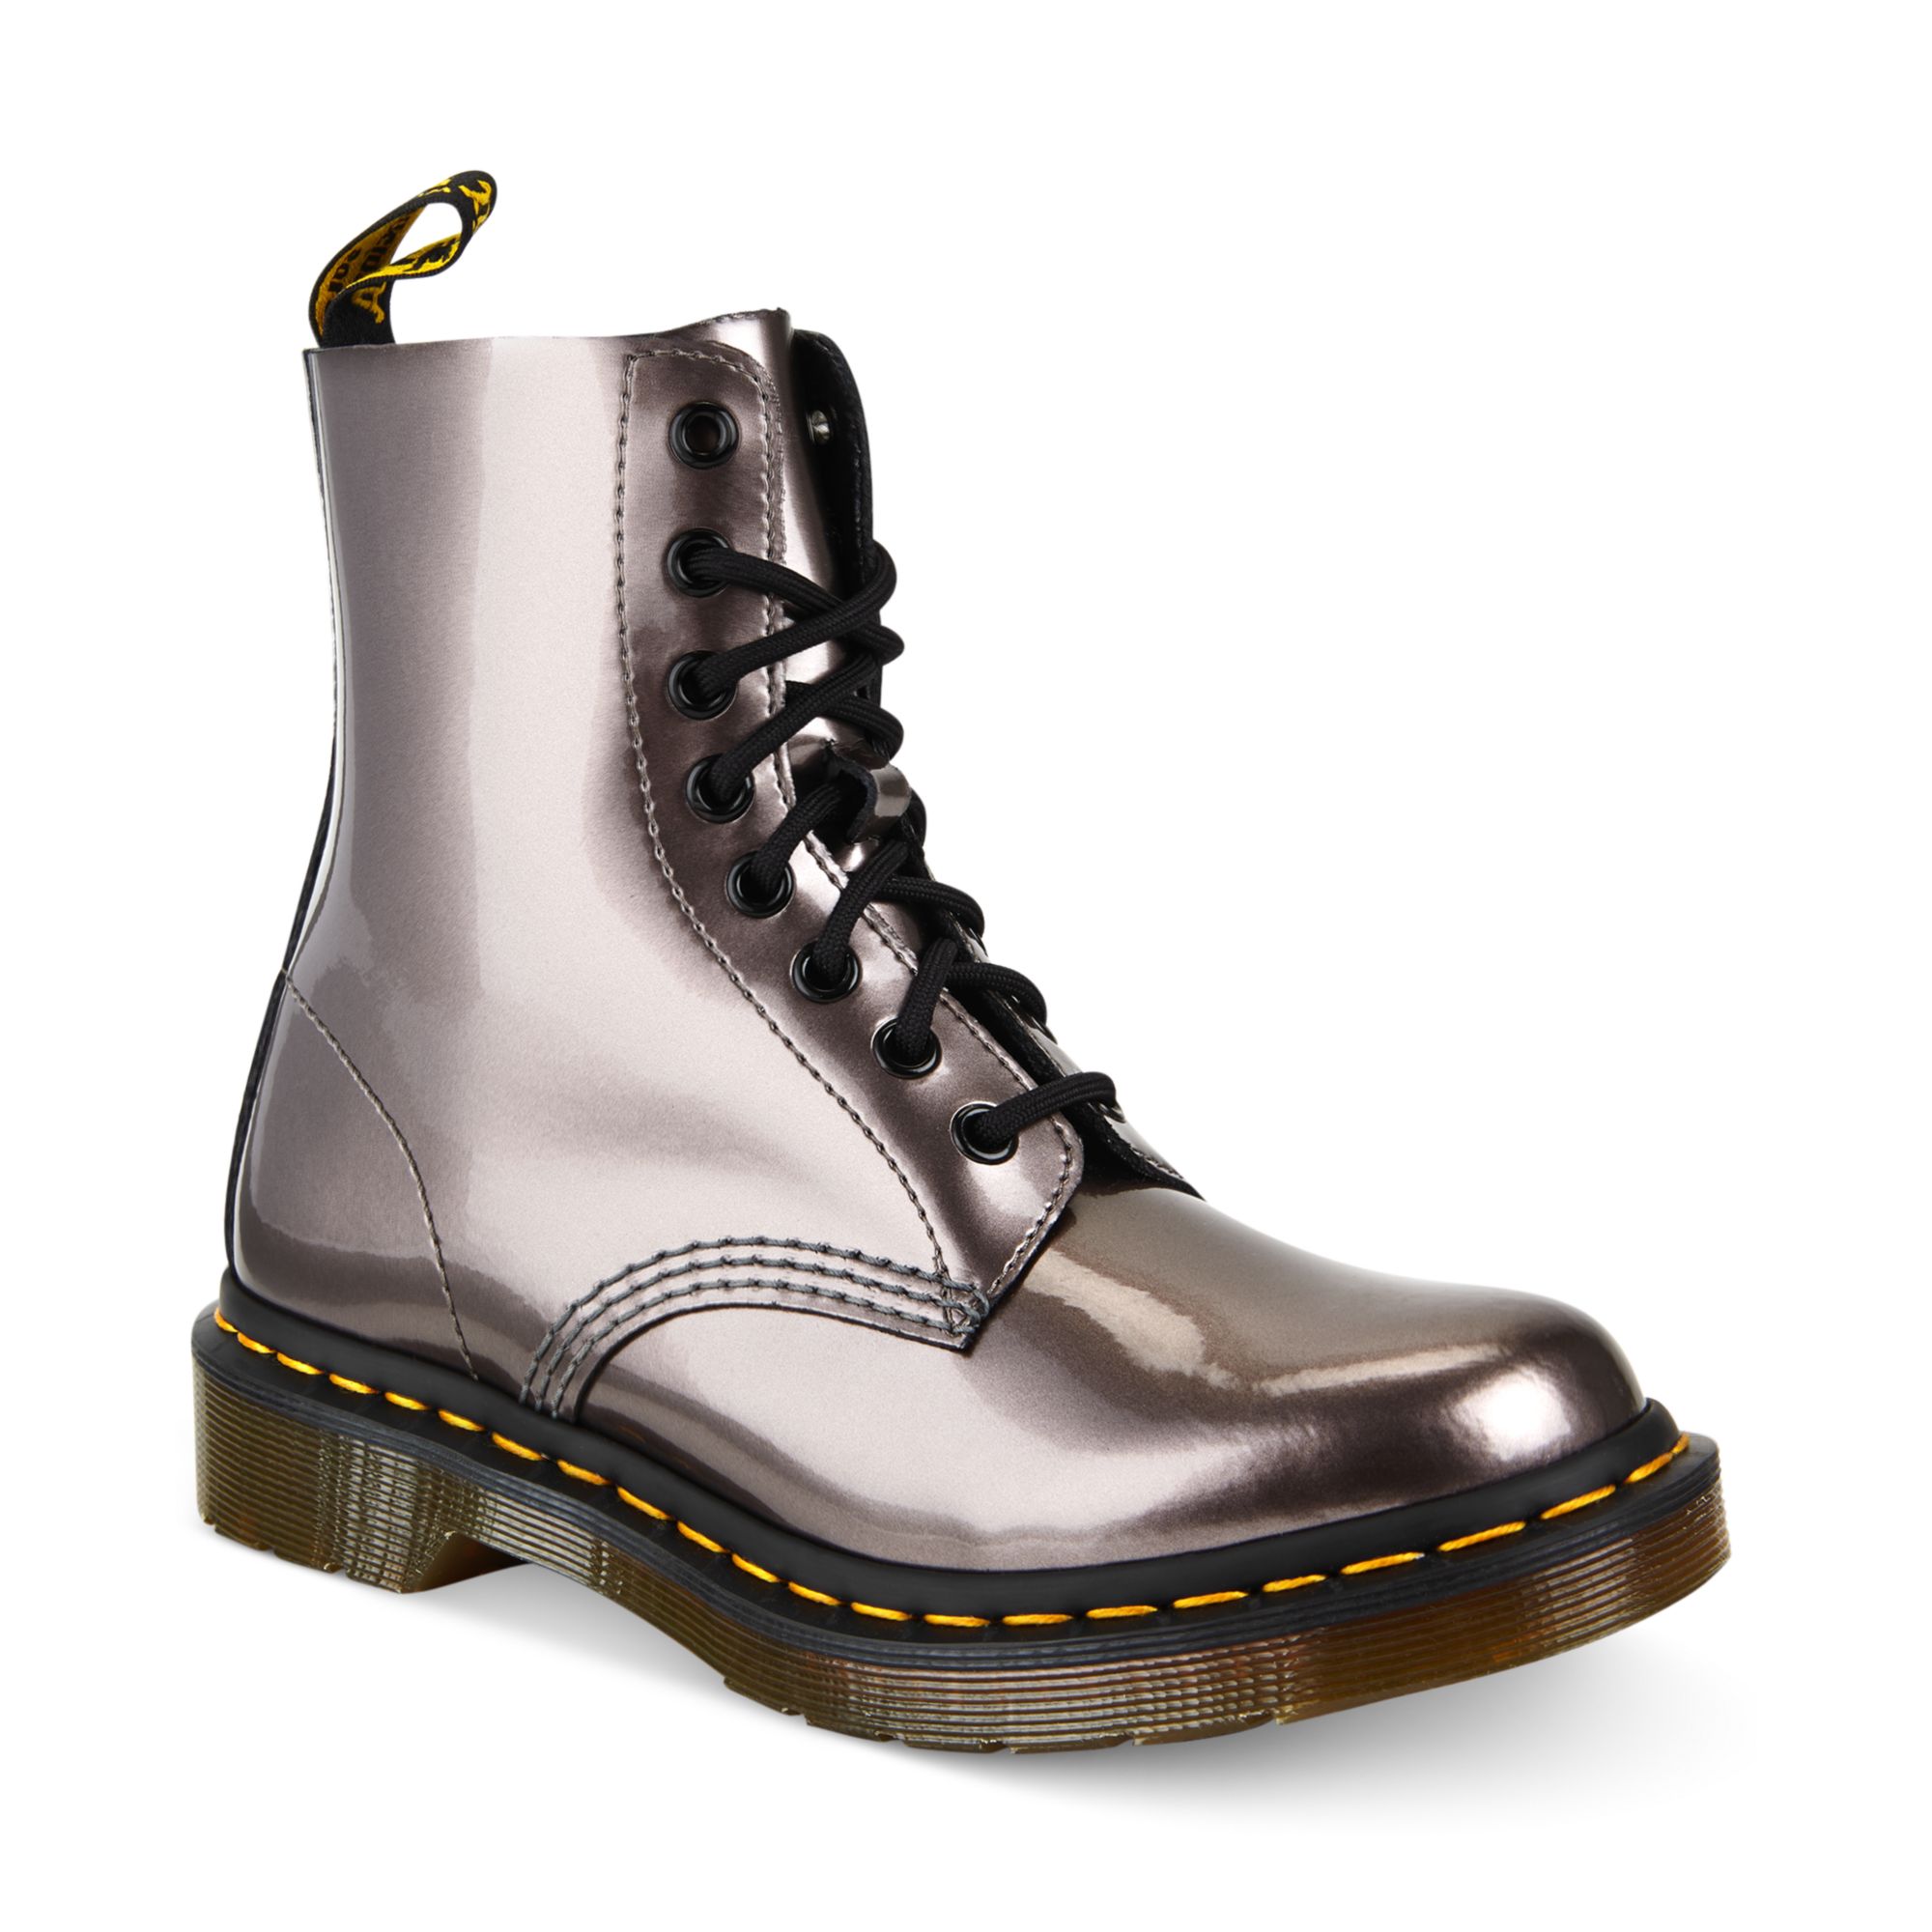 Dr. Martens Ankle Boots in Pewter Metallic (Metallic) | Lyst